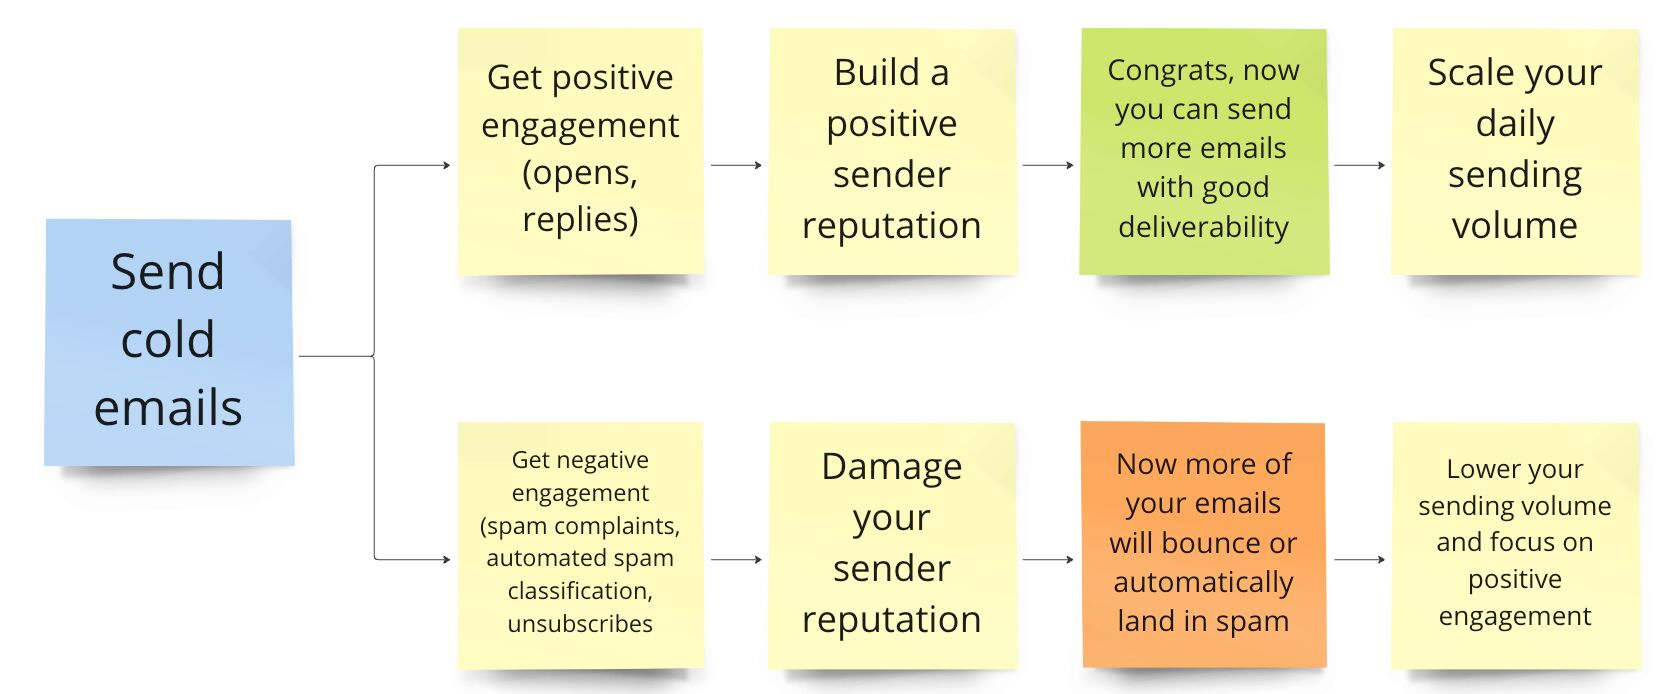 A diagram showing how email warmup helps you send more emails with good deliverability